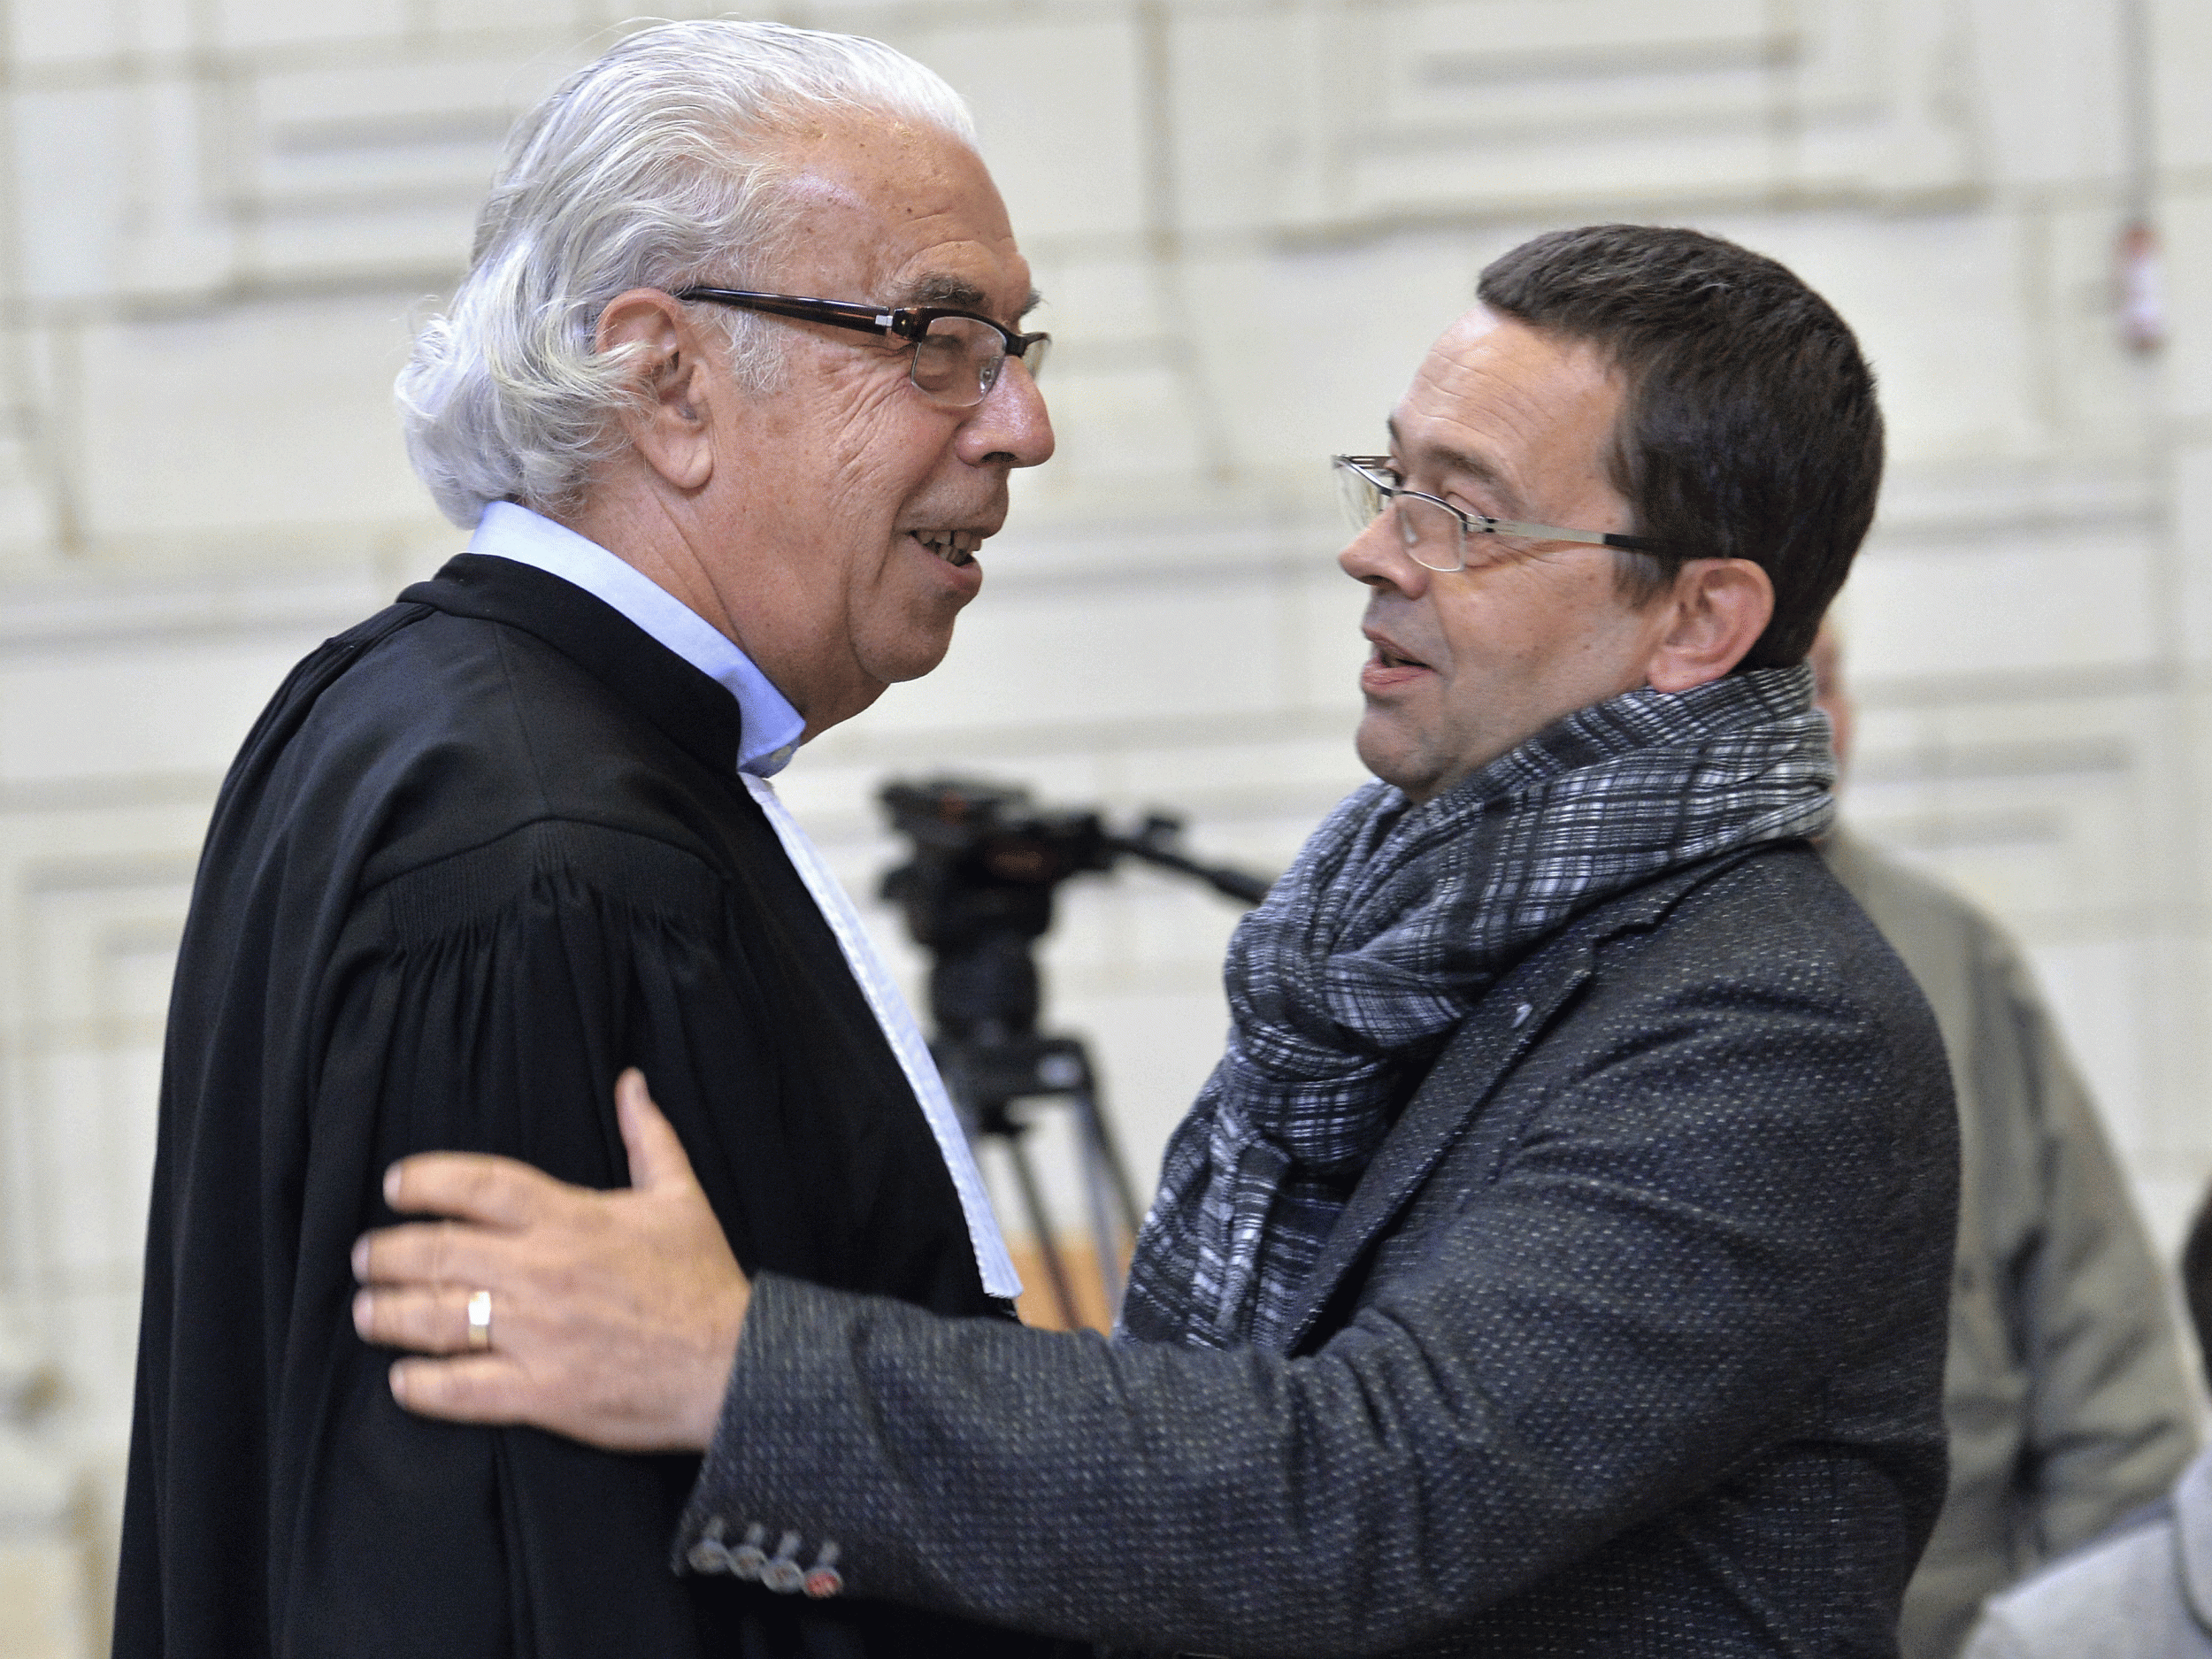 Nicolas Bonnemaison (right) speaks with one of his lawyers at Angers' courthouse on October 23